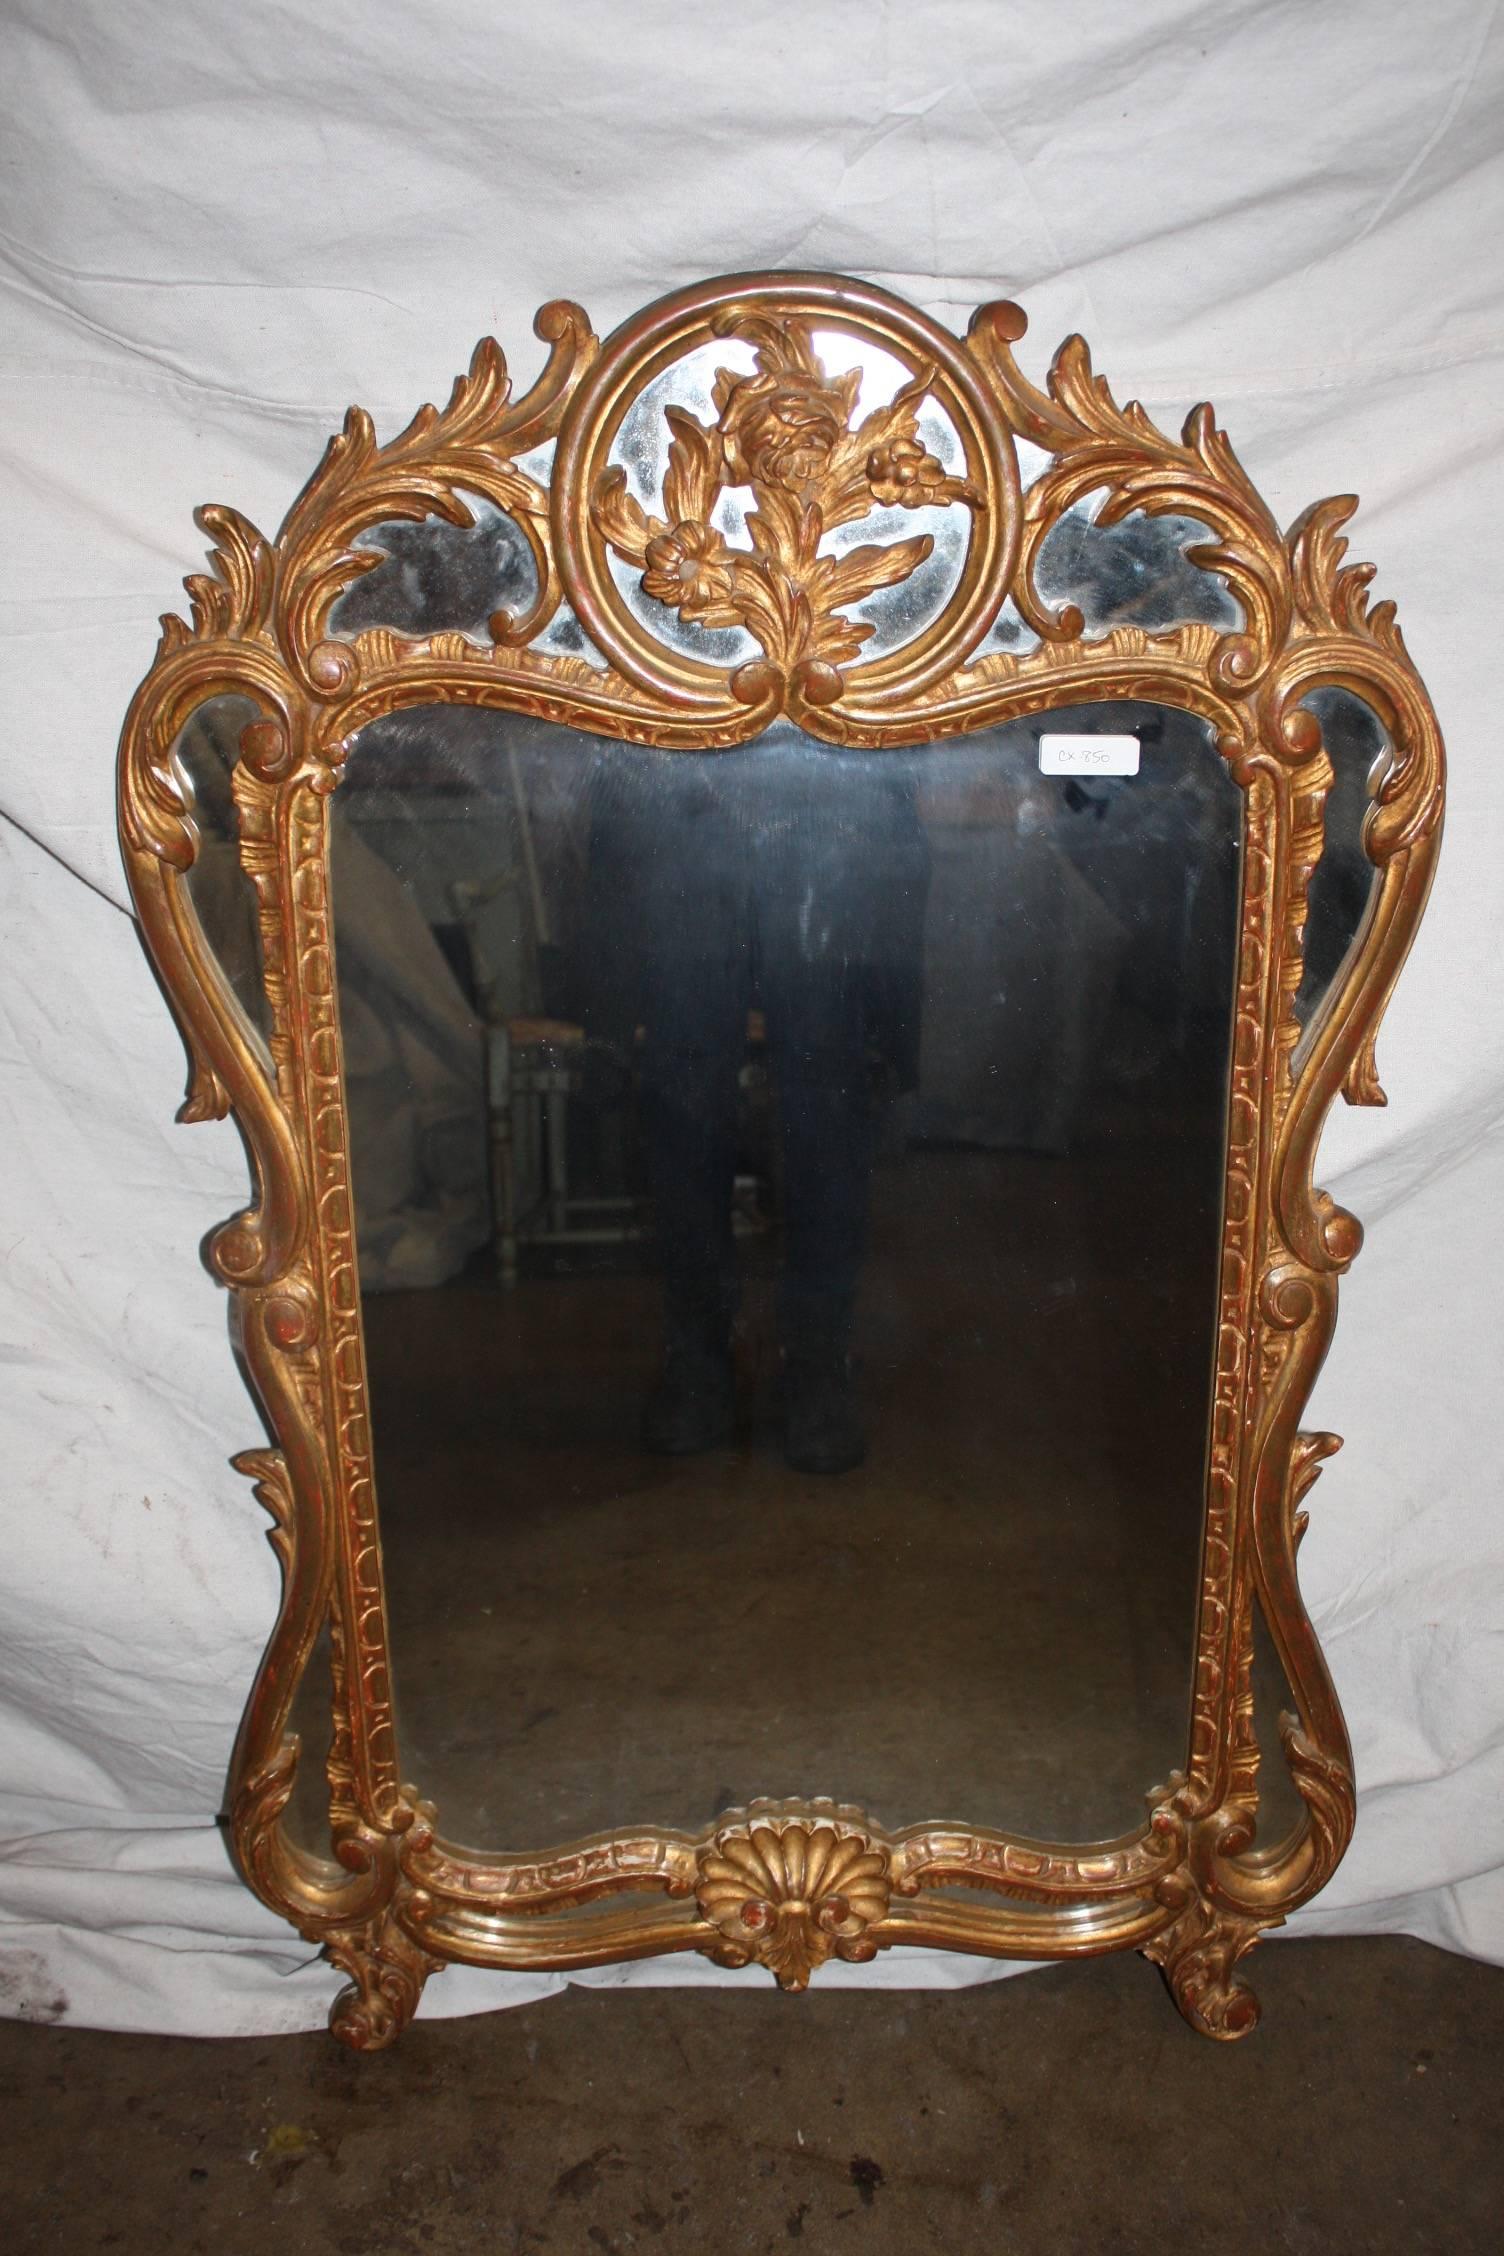 Early 20th century French Provencal mirror parclose.